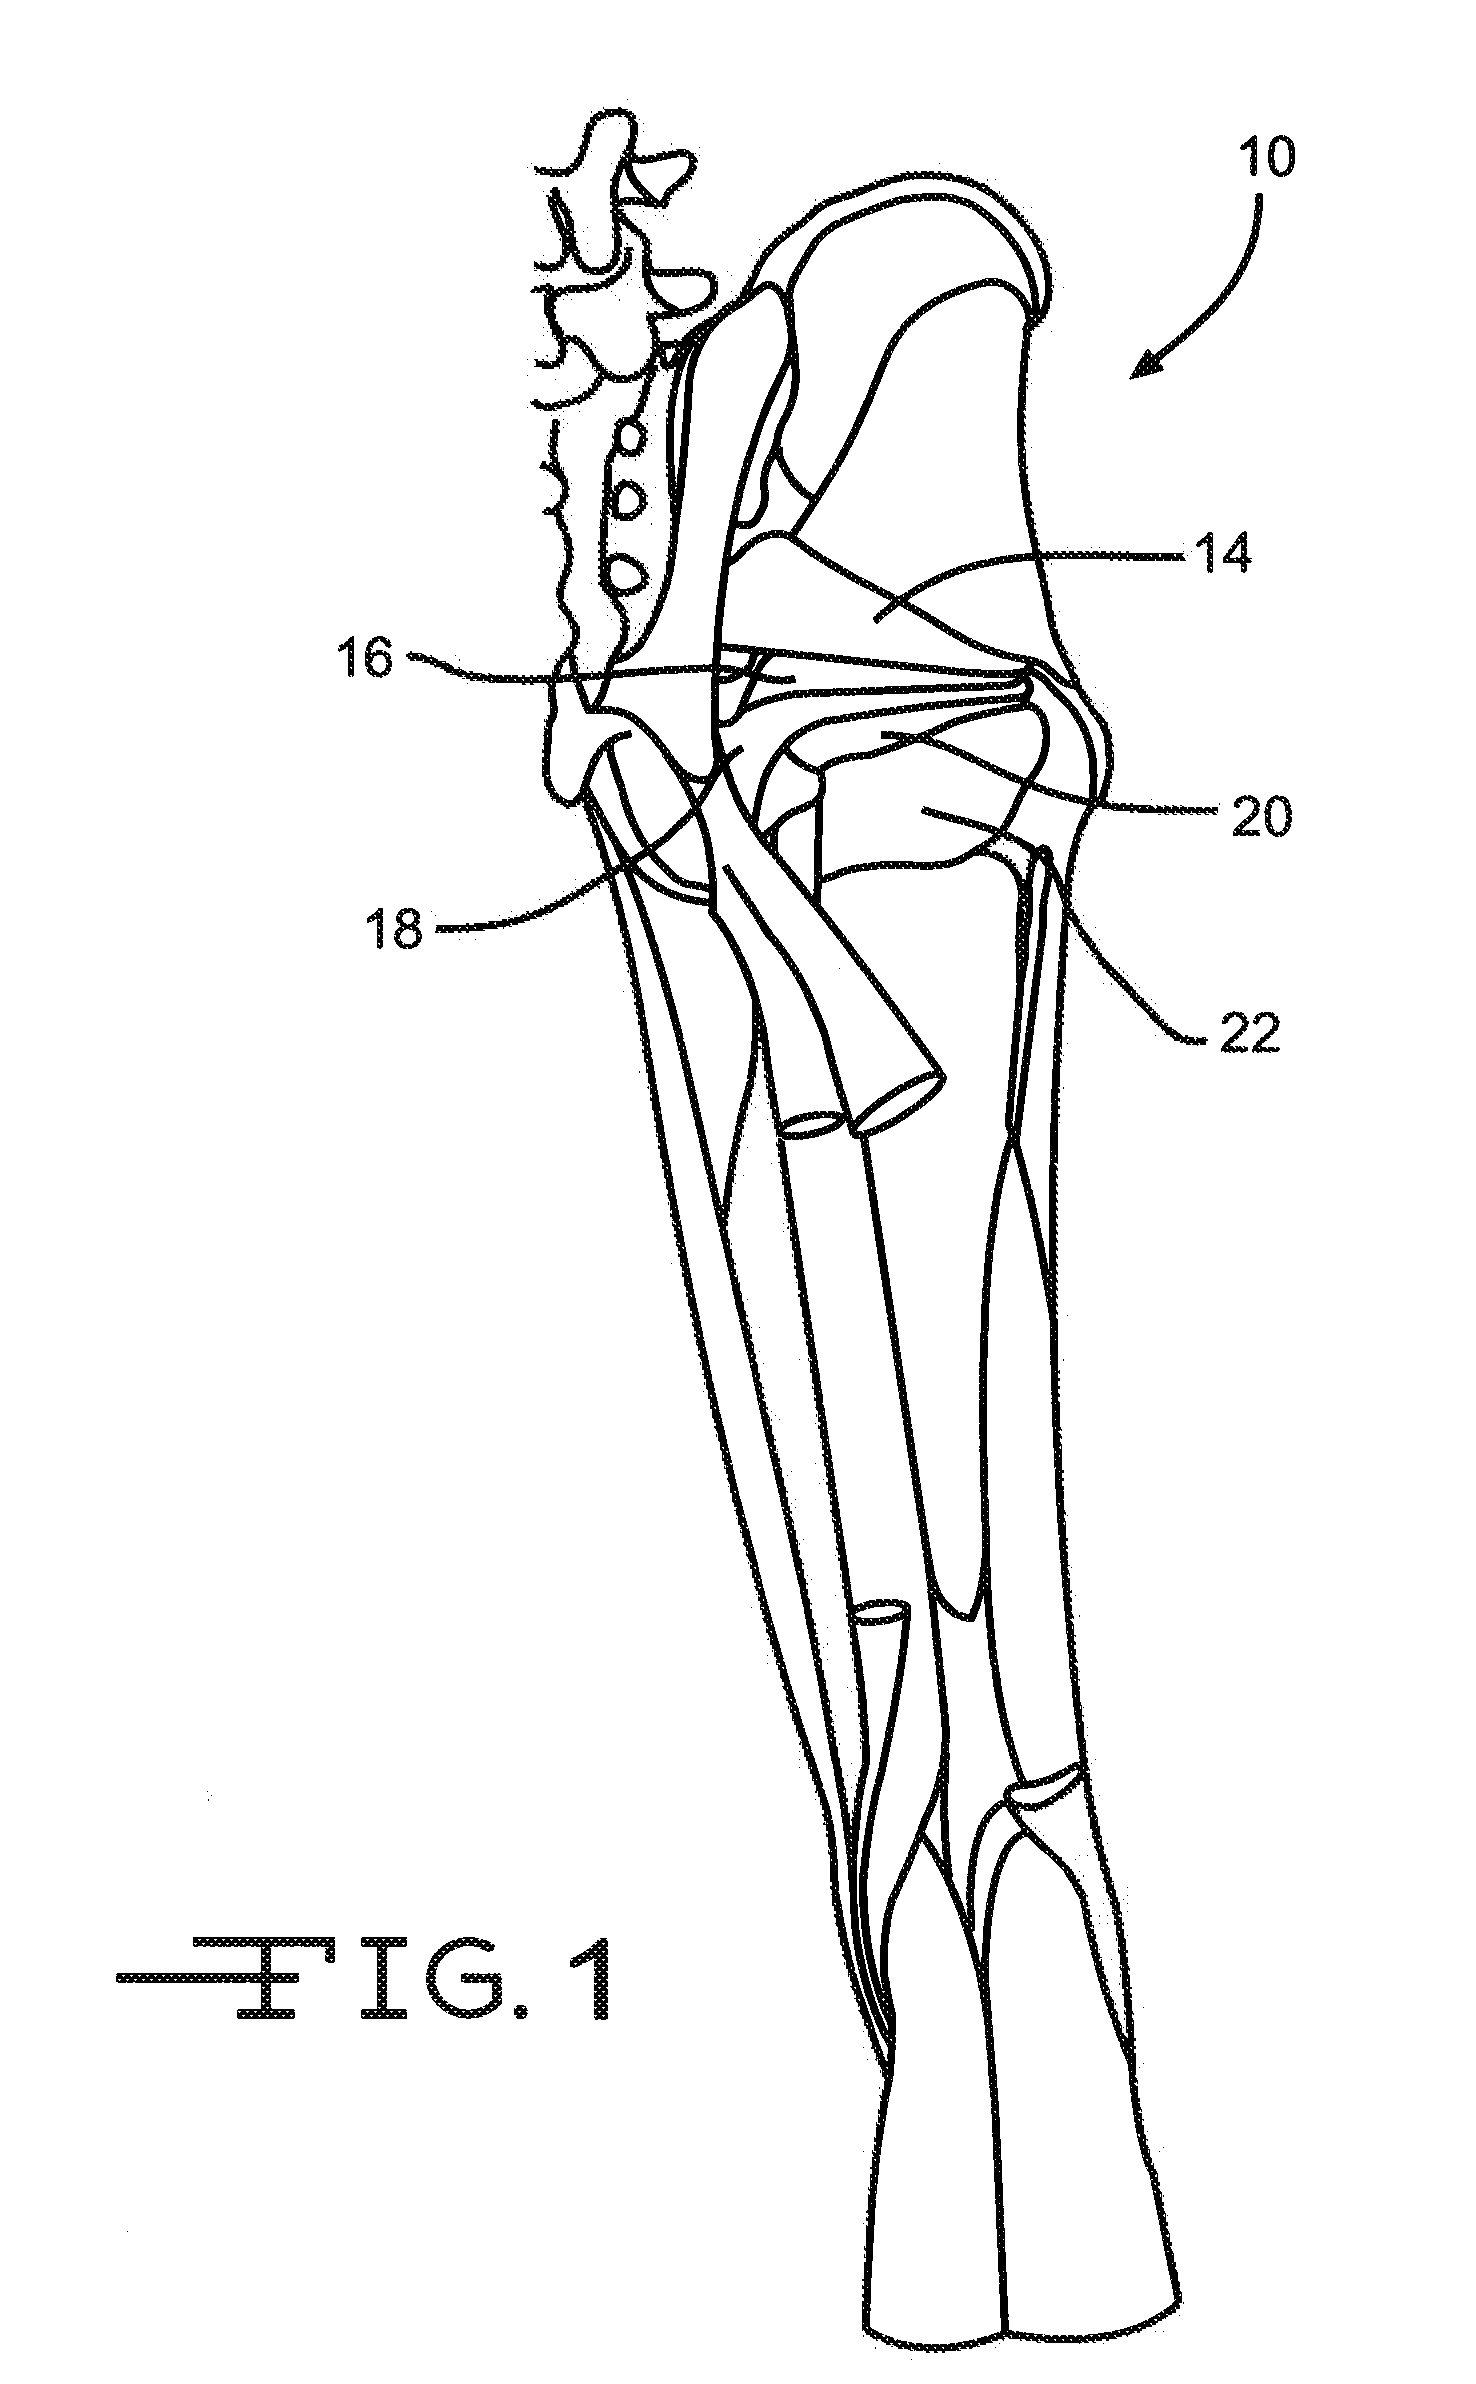 Retractor Tool For Minimally Invasive Hip Replacement Surgery